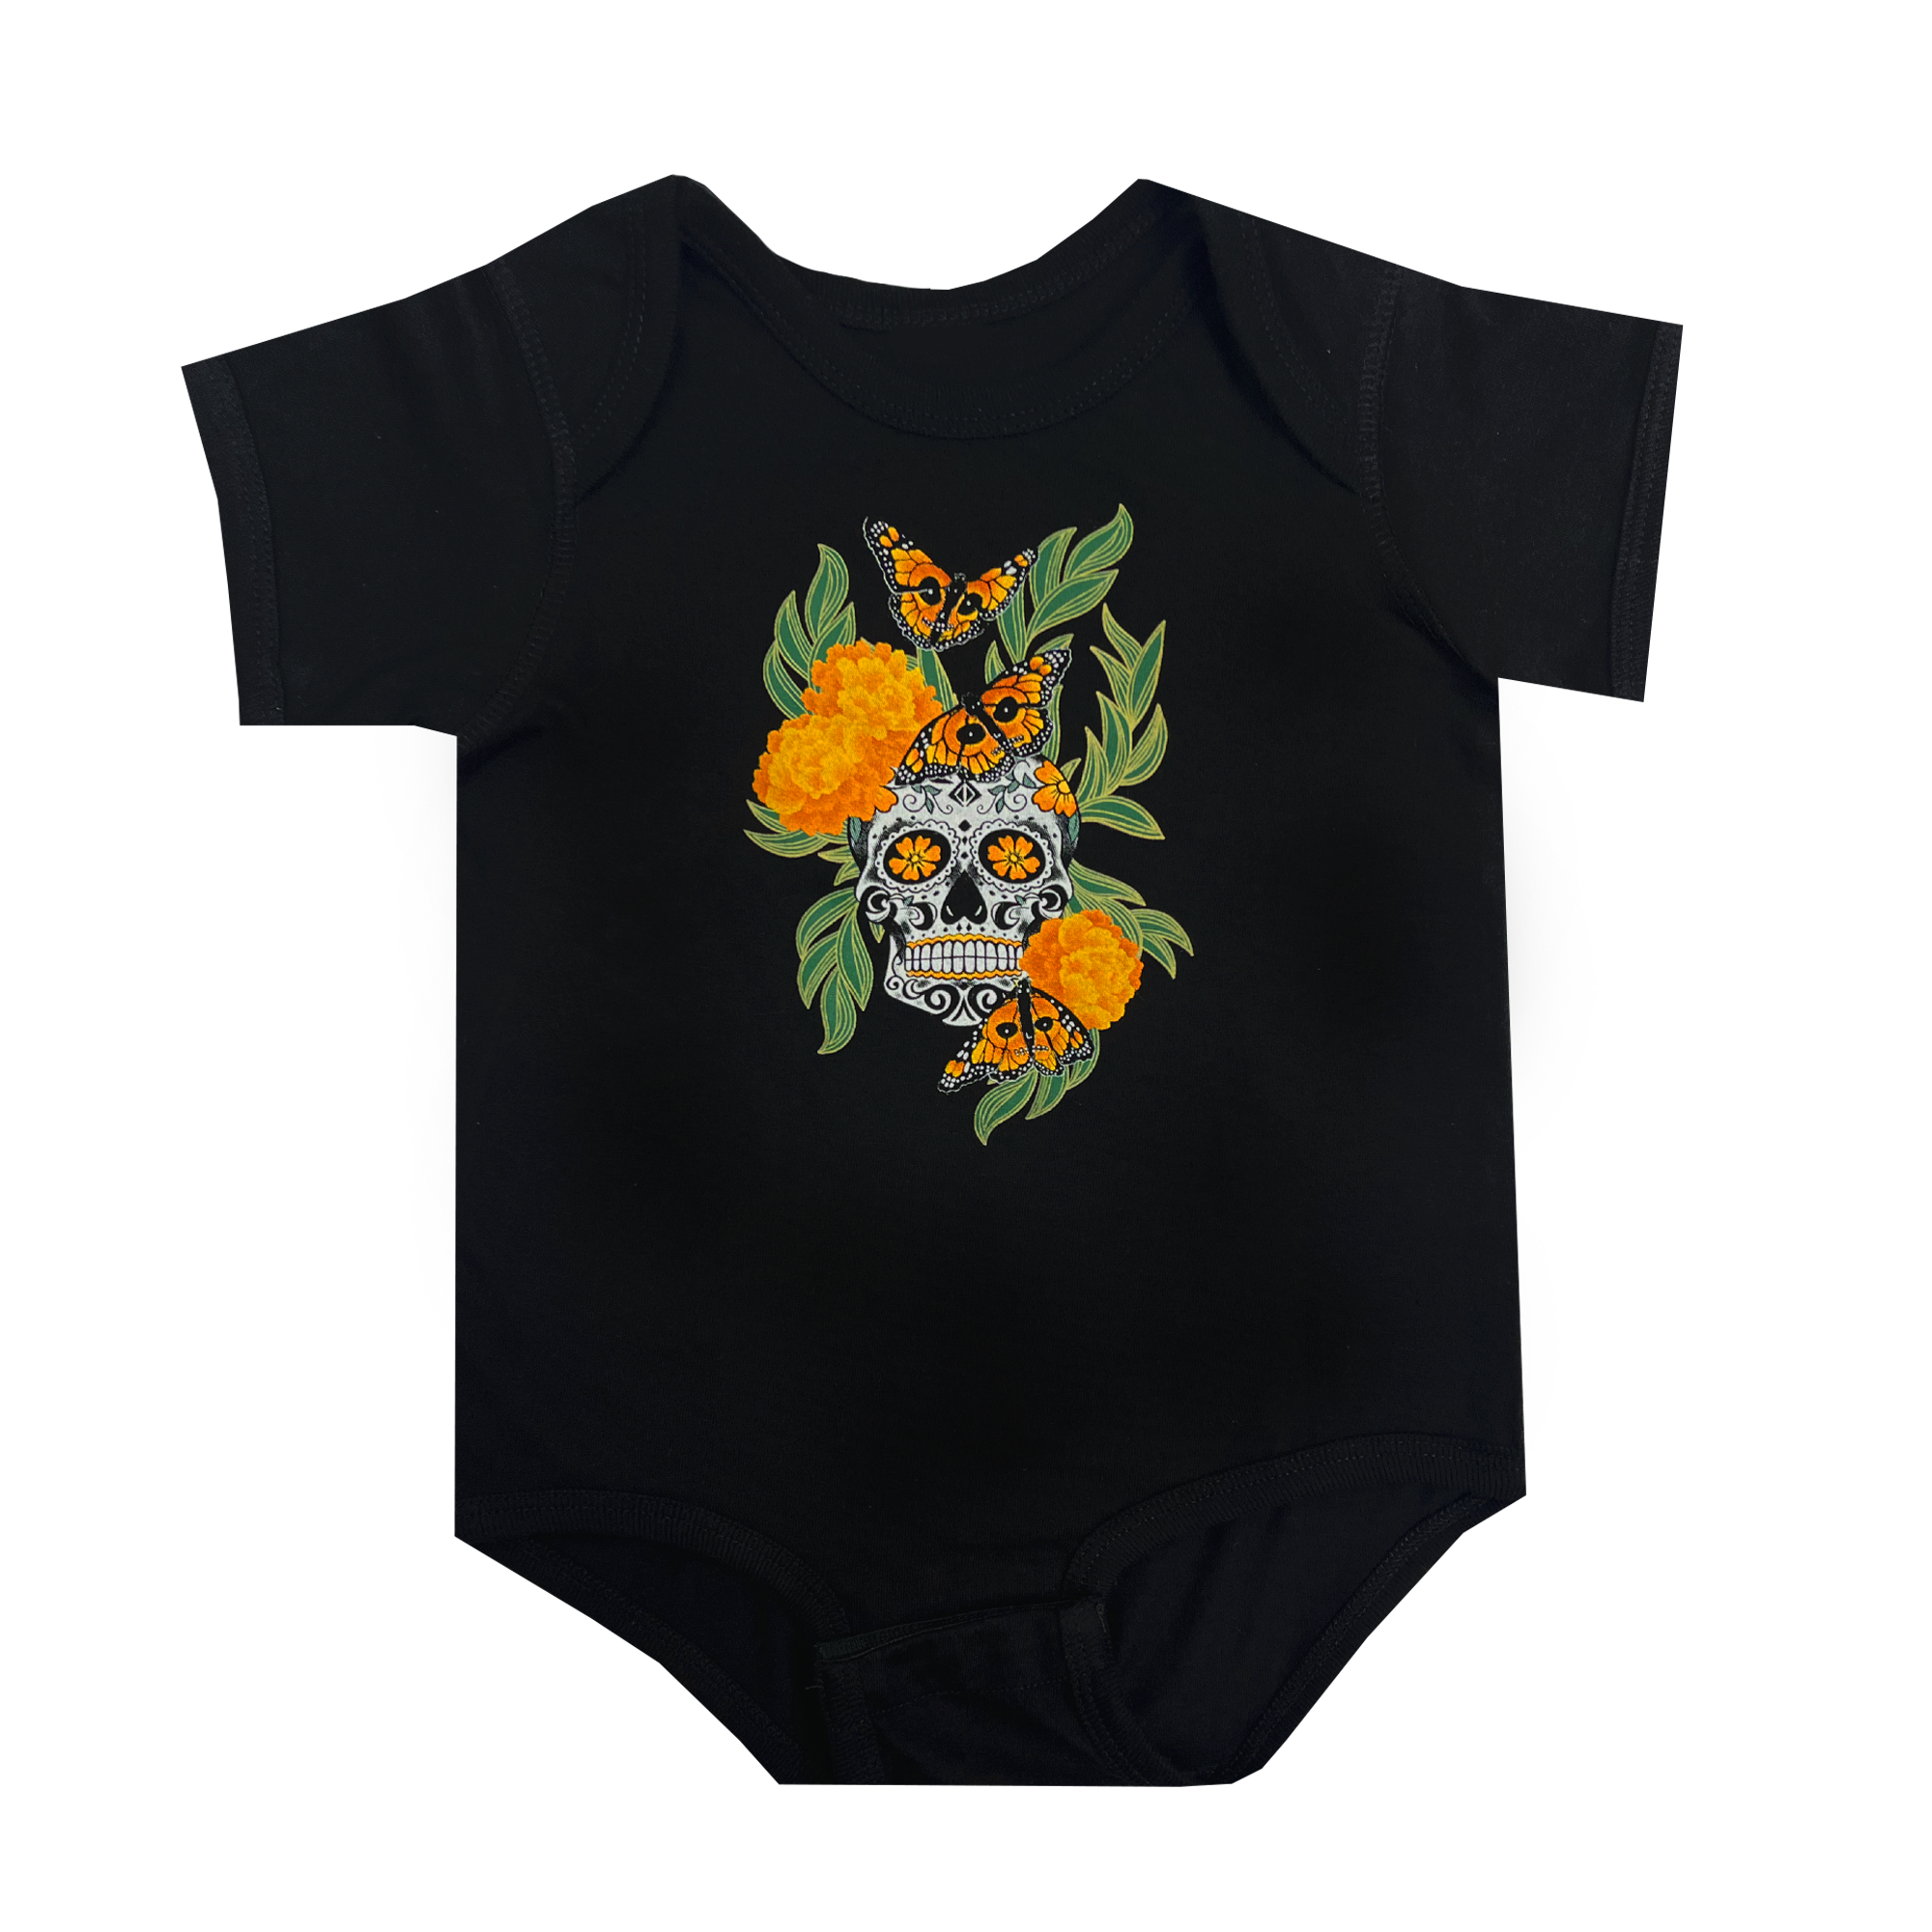 Black baby one-piece with graphic art by Oakland artist Jet Martinez depicting a sugar skull surrounded by Marigolds and Monarch butterflies.